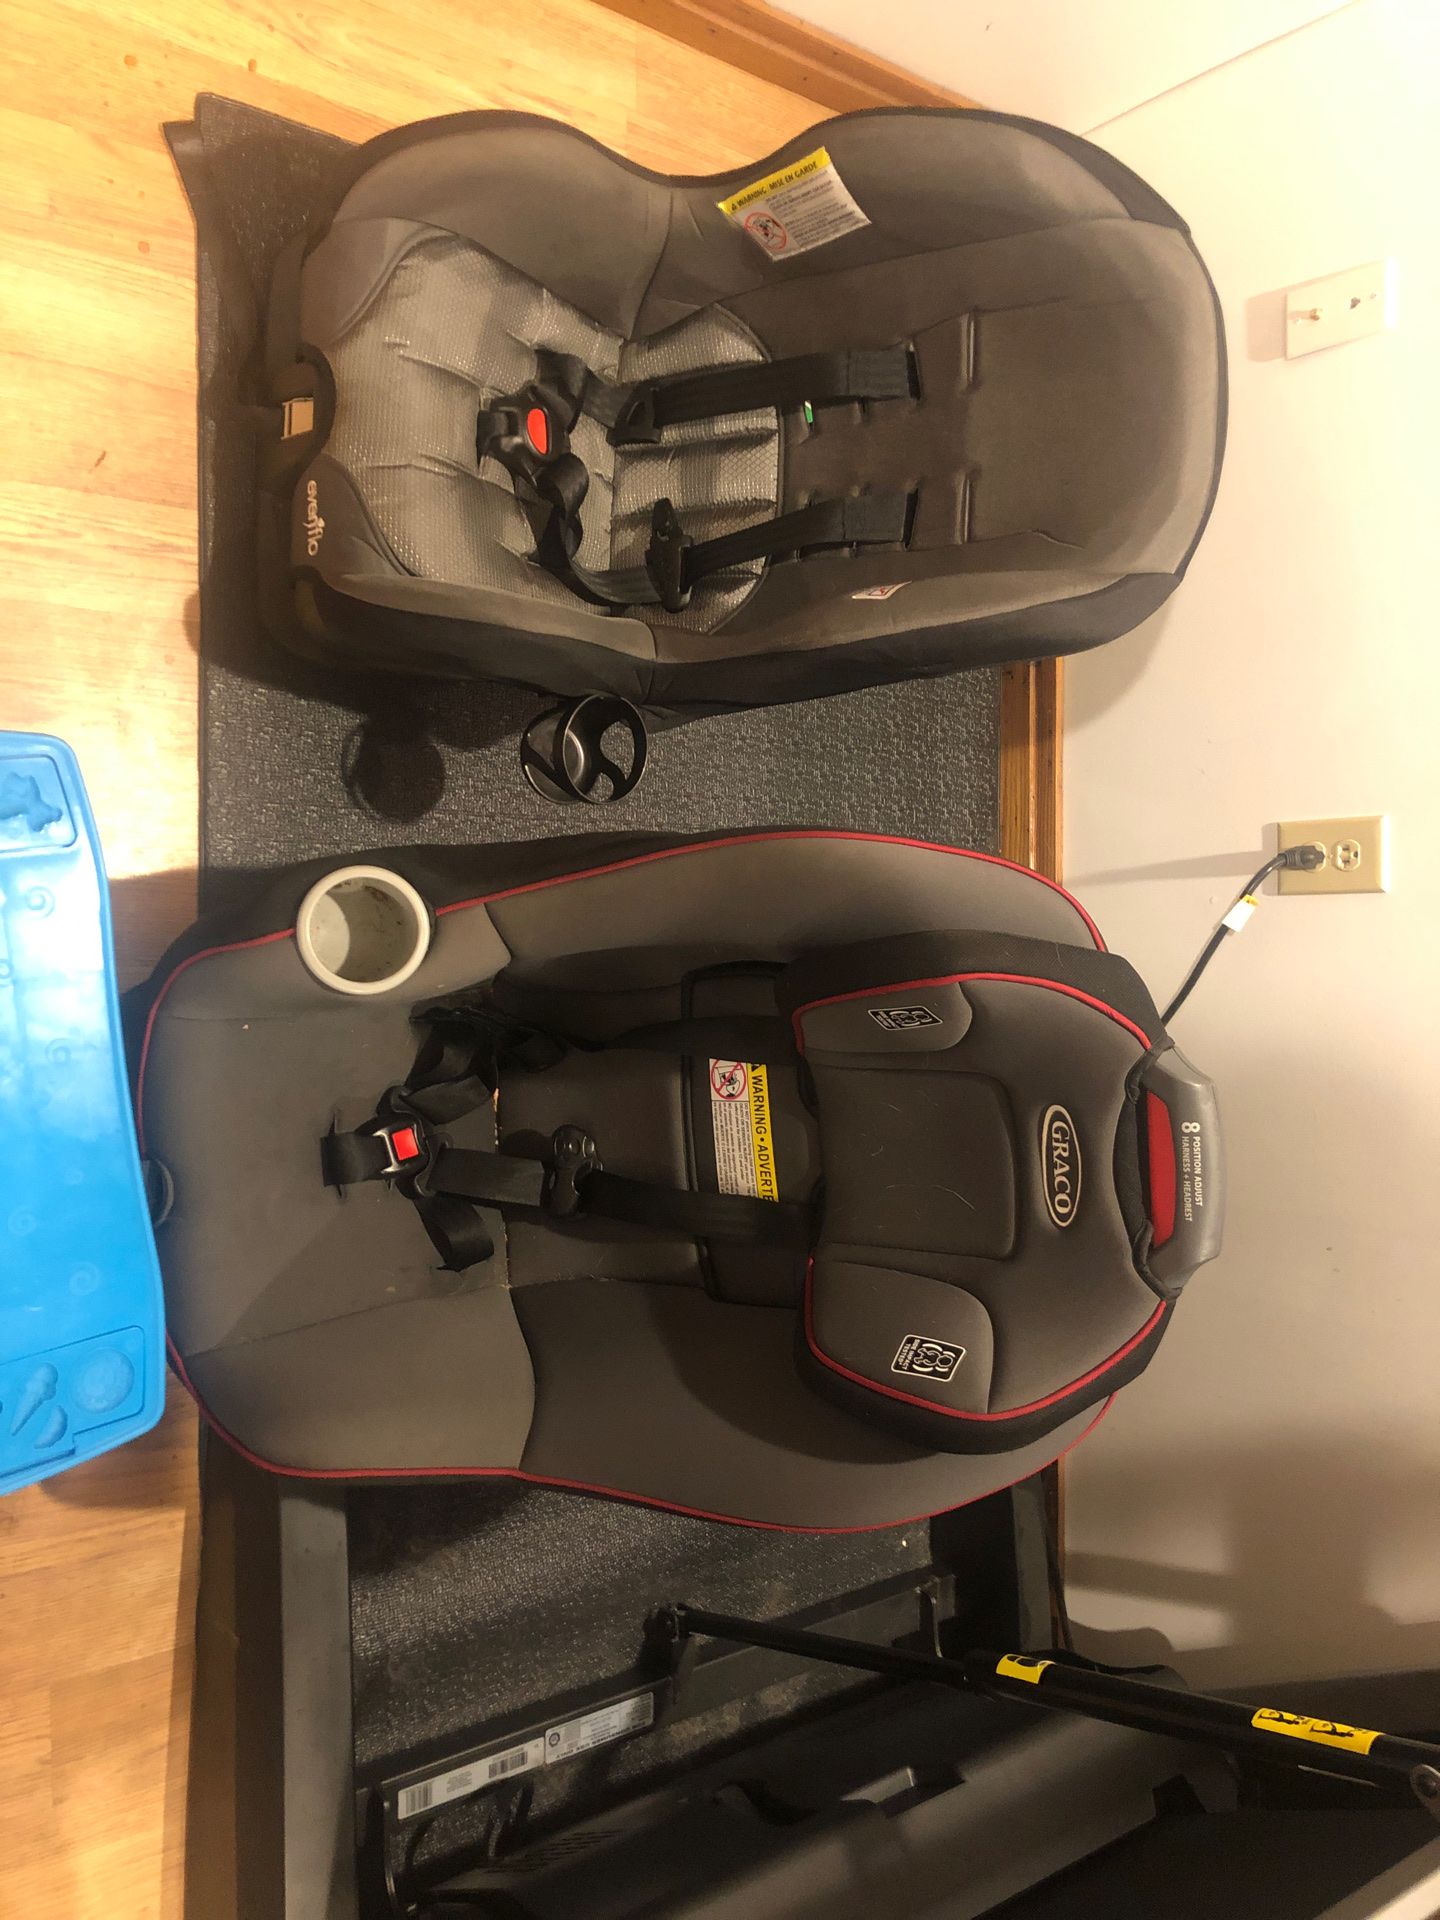 Car seats forward facing. Graco on right is sold. Even flo on left available